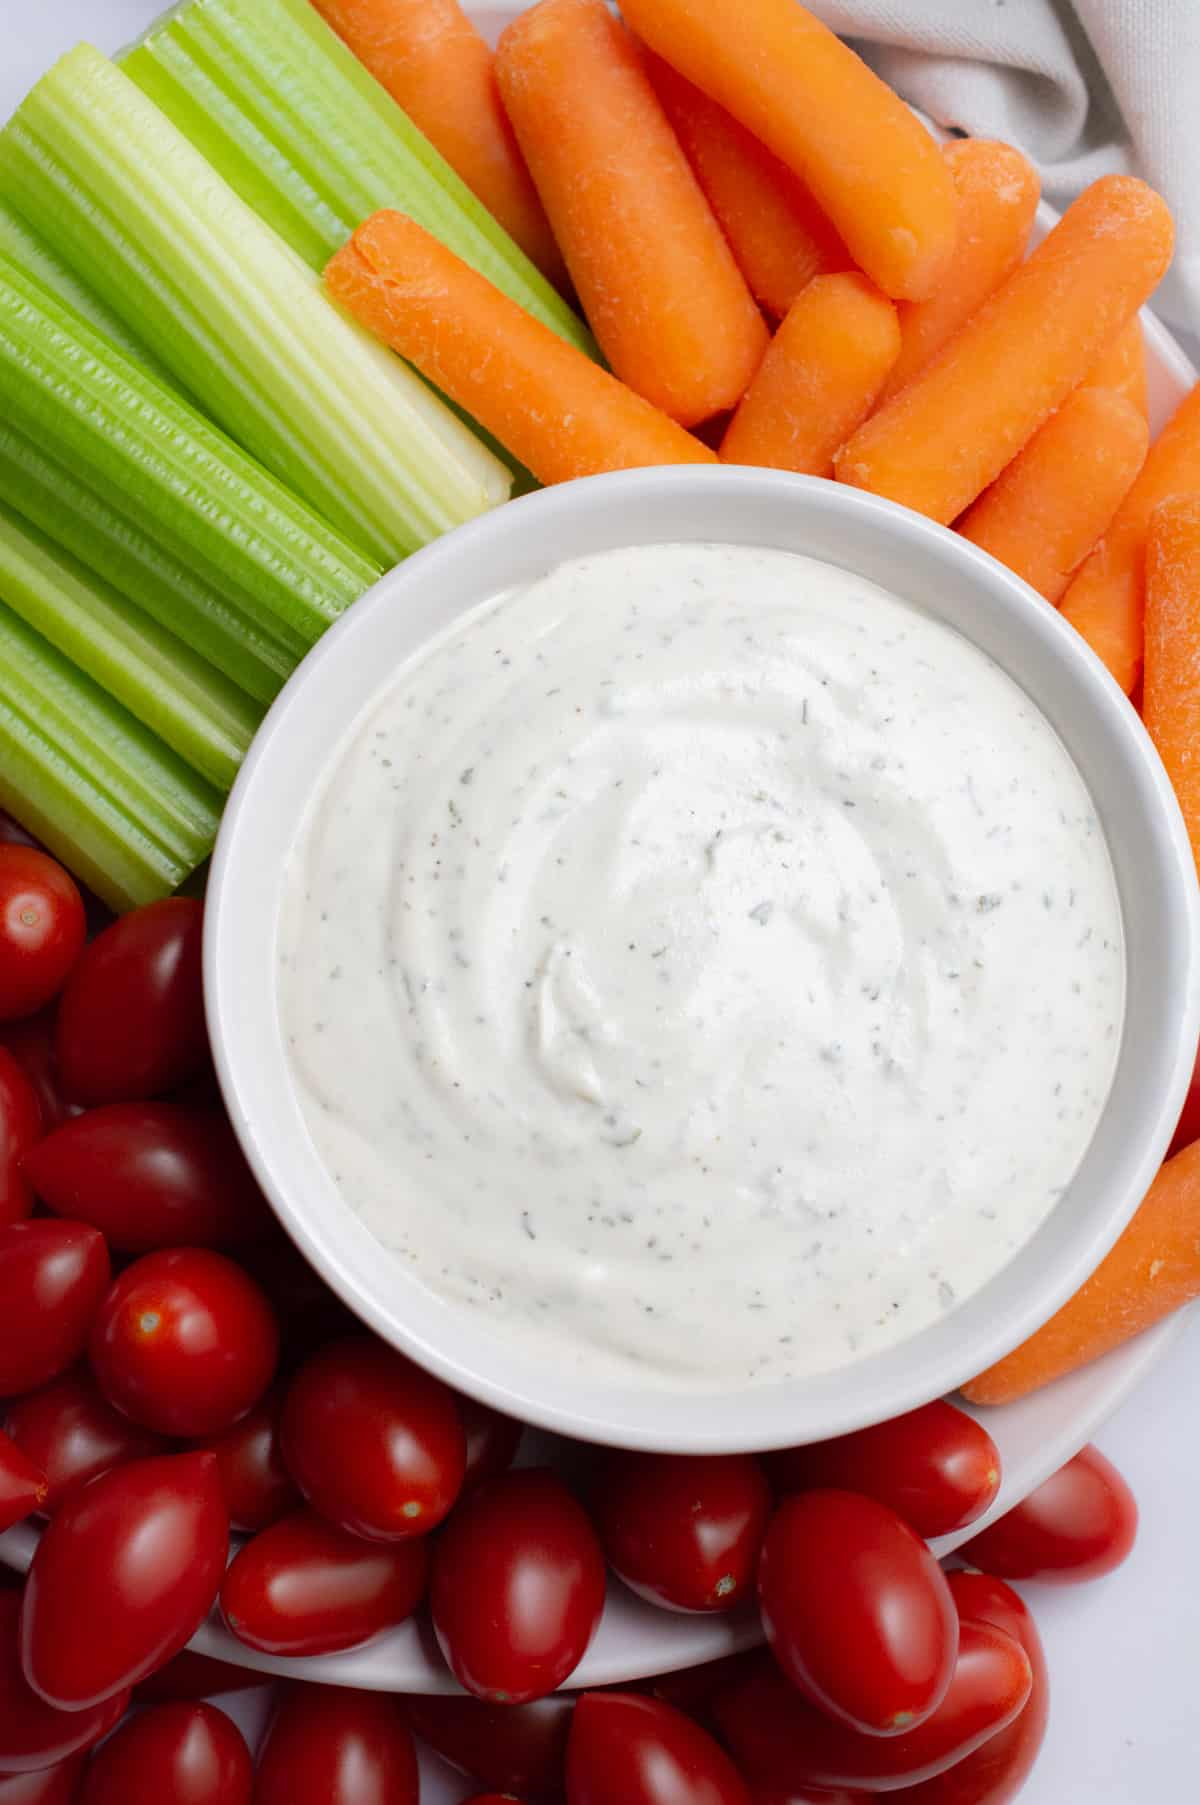 A bowl of vegan ranch dip on a plate with carrots, celery, and grape tomatoes.